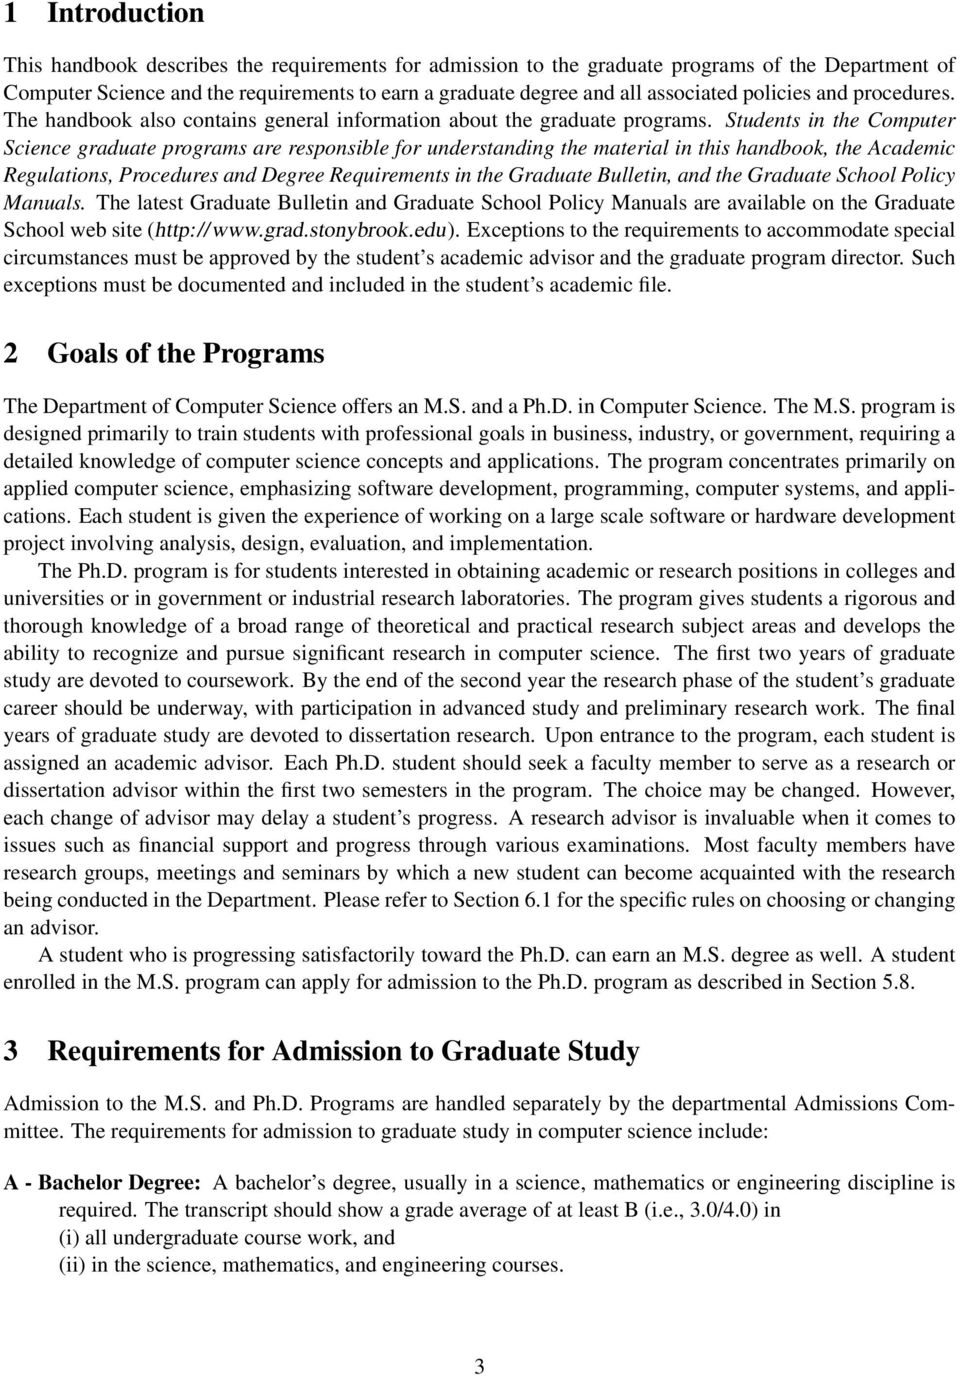 Students in the Computer Science graduate programs are responsible for understanding the material in this handbook, the Academic Regulations, Procedures and Degree Requirements in the Graduate